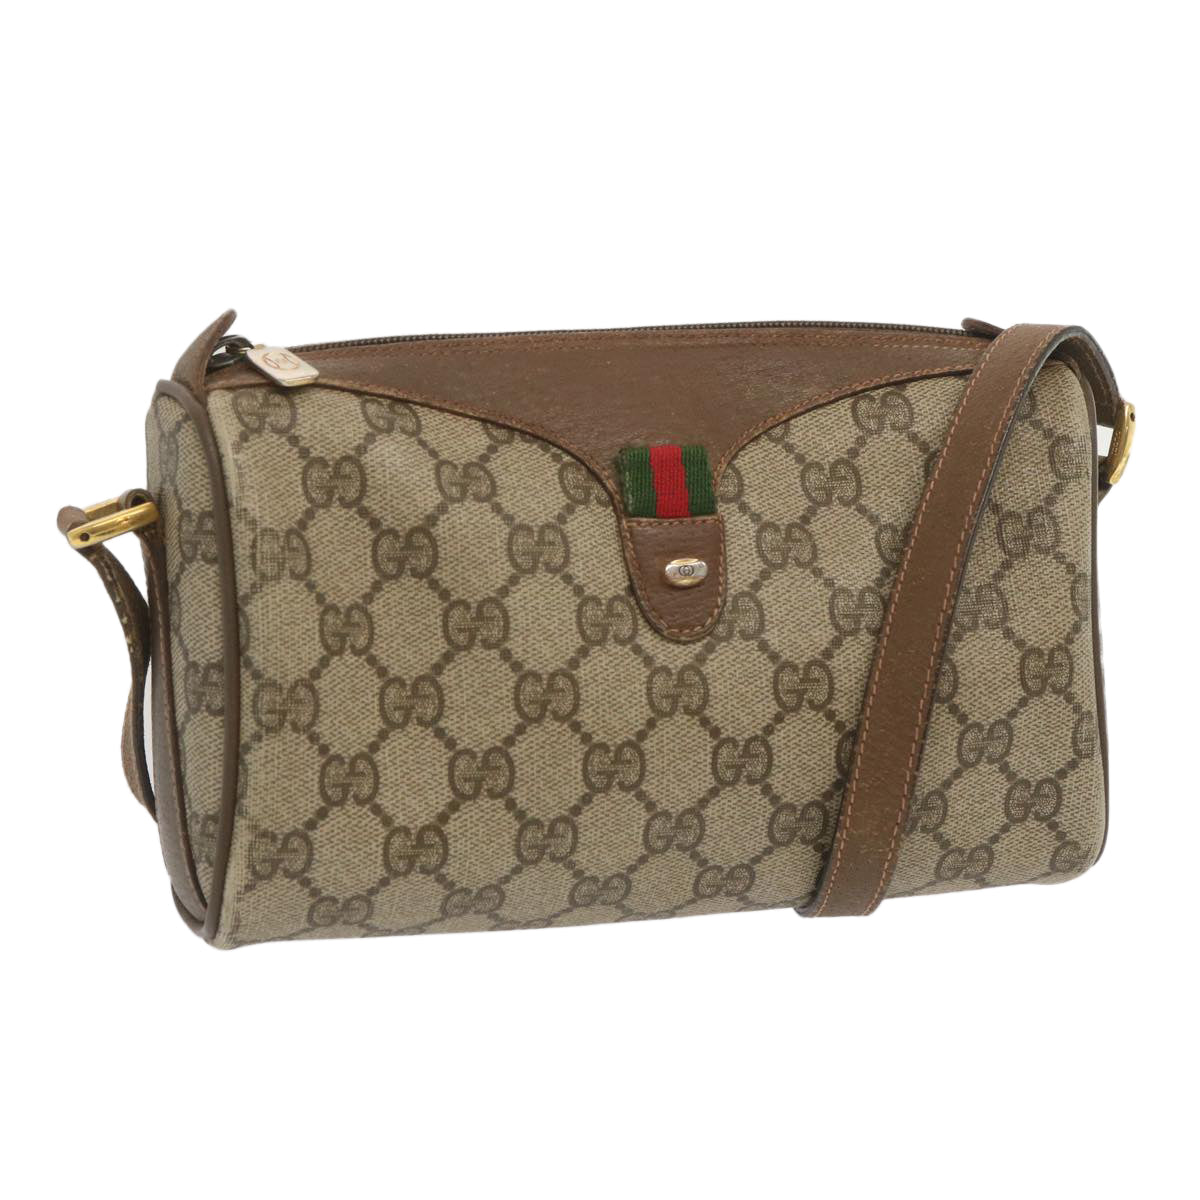 GUCCI GG Canvas Web Sherry Line Shoulder Bag Beige Green 89 02 018 Auth bs12742